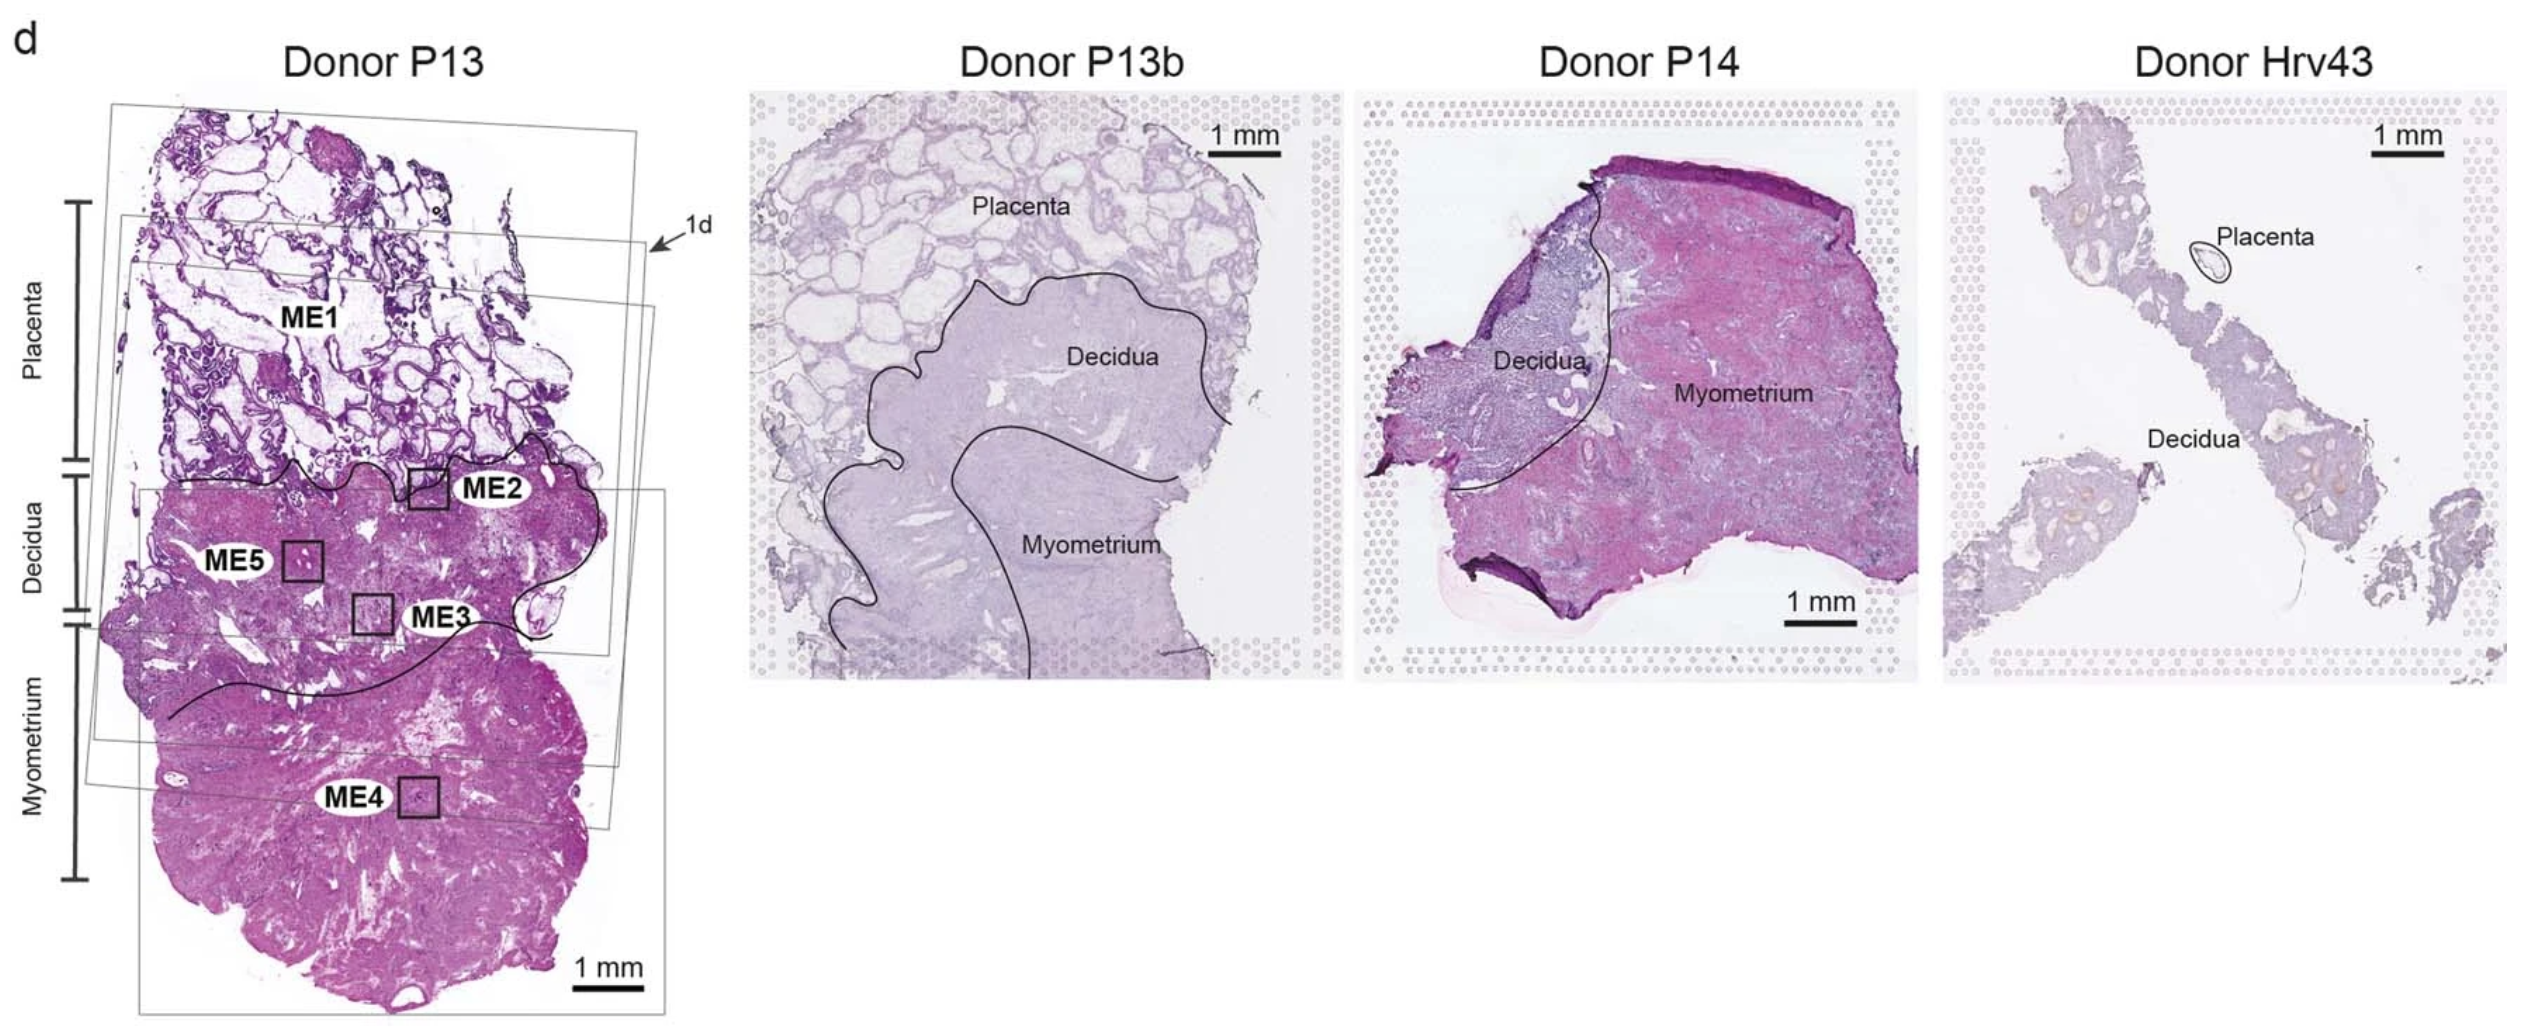 Extended Figure 1d from Arutyunyan et al. Histological overview (H&E staining) of donors P13, P14, and Hrv43 tissues with annotations of tissue regions. For the implantation site of donor P13 (~8–9 PCW, left), black squares (small) indicate trophoblast microenvironments in space; faint grey squares (large) indicate positioning of tissue on Visium spatial transcriptomics Capture Areas; arrow indicates representative Visium section further explored in Fig. 1d. For Visium, P13 (n = 5 feature areas, 4 consecutive slides with overlapping positions and 1 slide from an additional tissue block—P13b), P14 (n = 2 feature areas, consecutive slides with same position), Hrv43 (n = 1 feature area). Credit: Arutyunyan A, et al. Spatial multiomics map of trophoblast development in early pregnancy. Nature 616: 143–151 (2023). doi: 10.1038/s41586-023-05869-0. (CC BY 4.0).